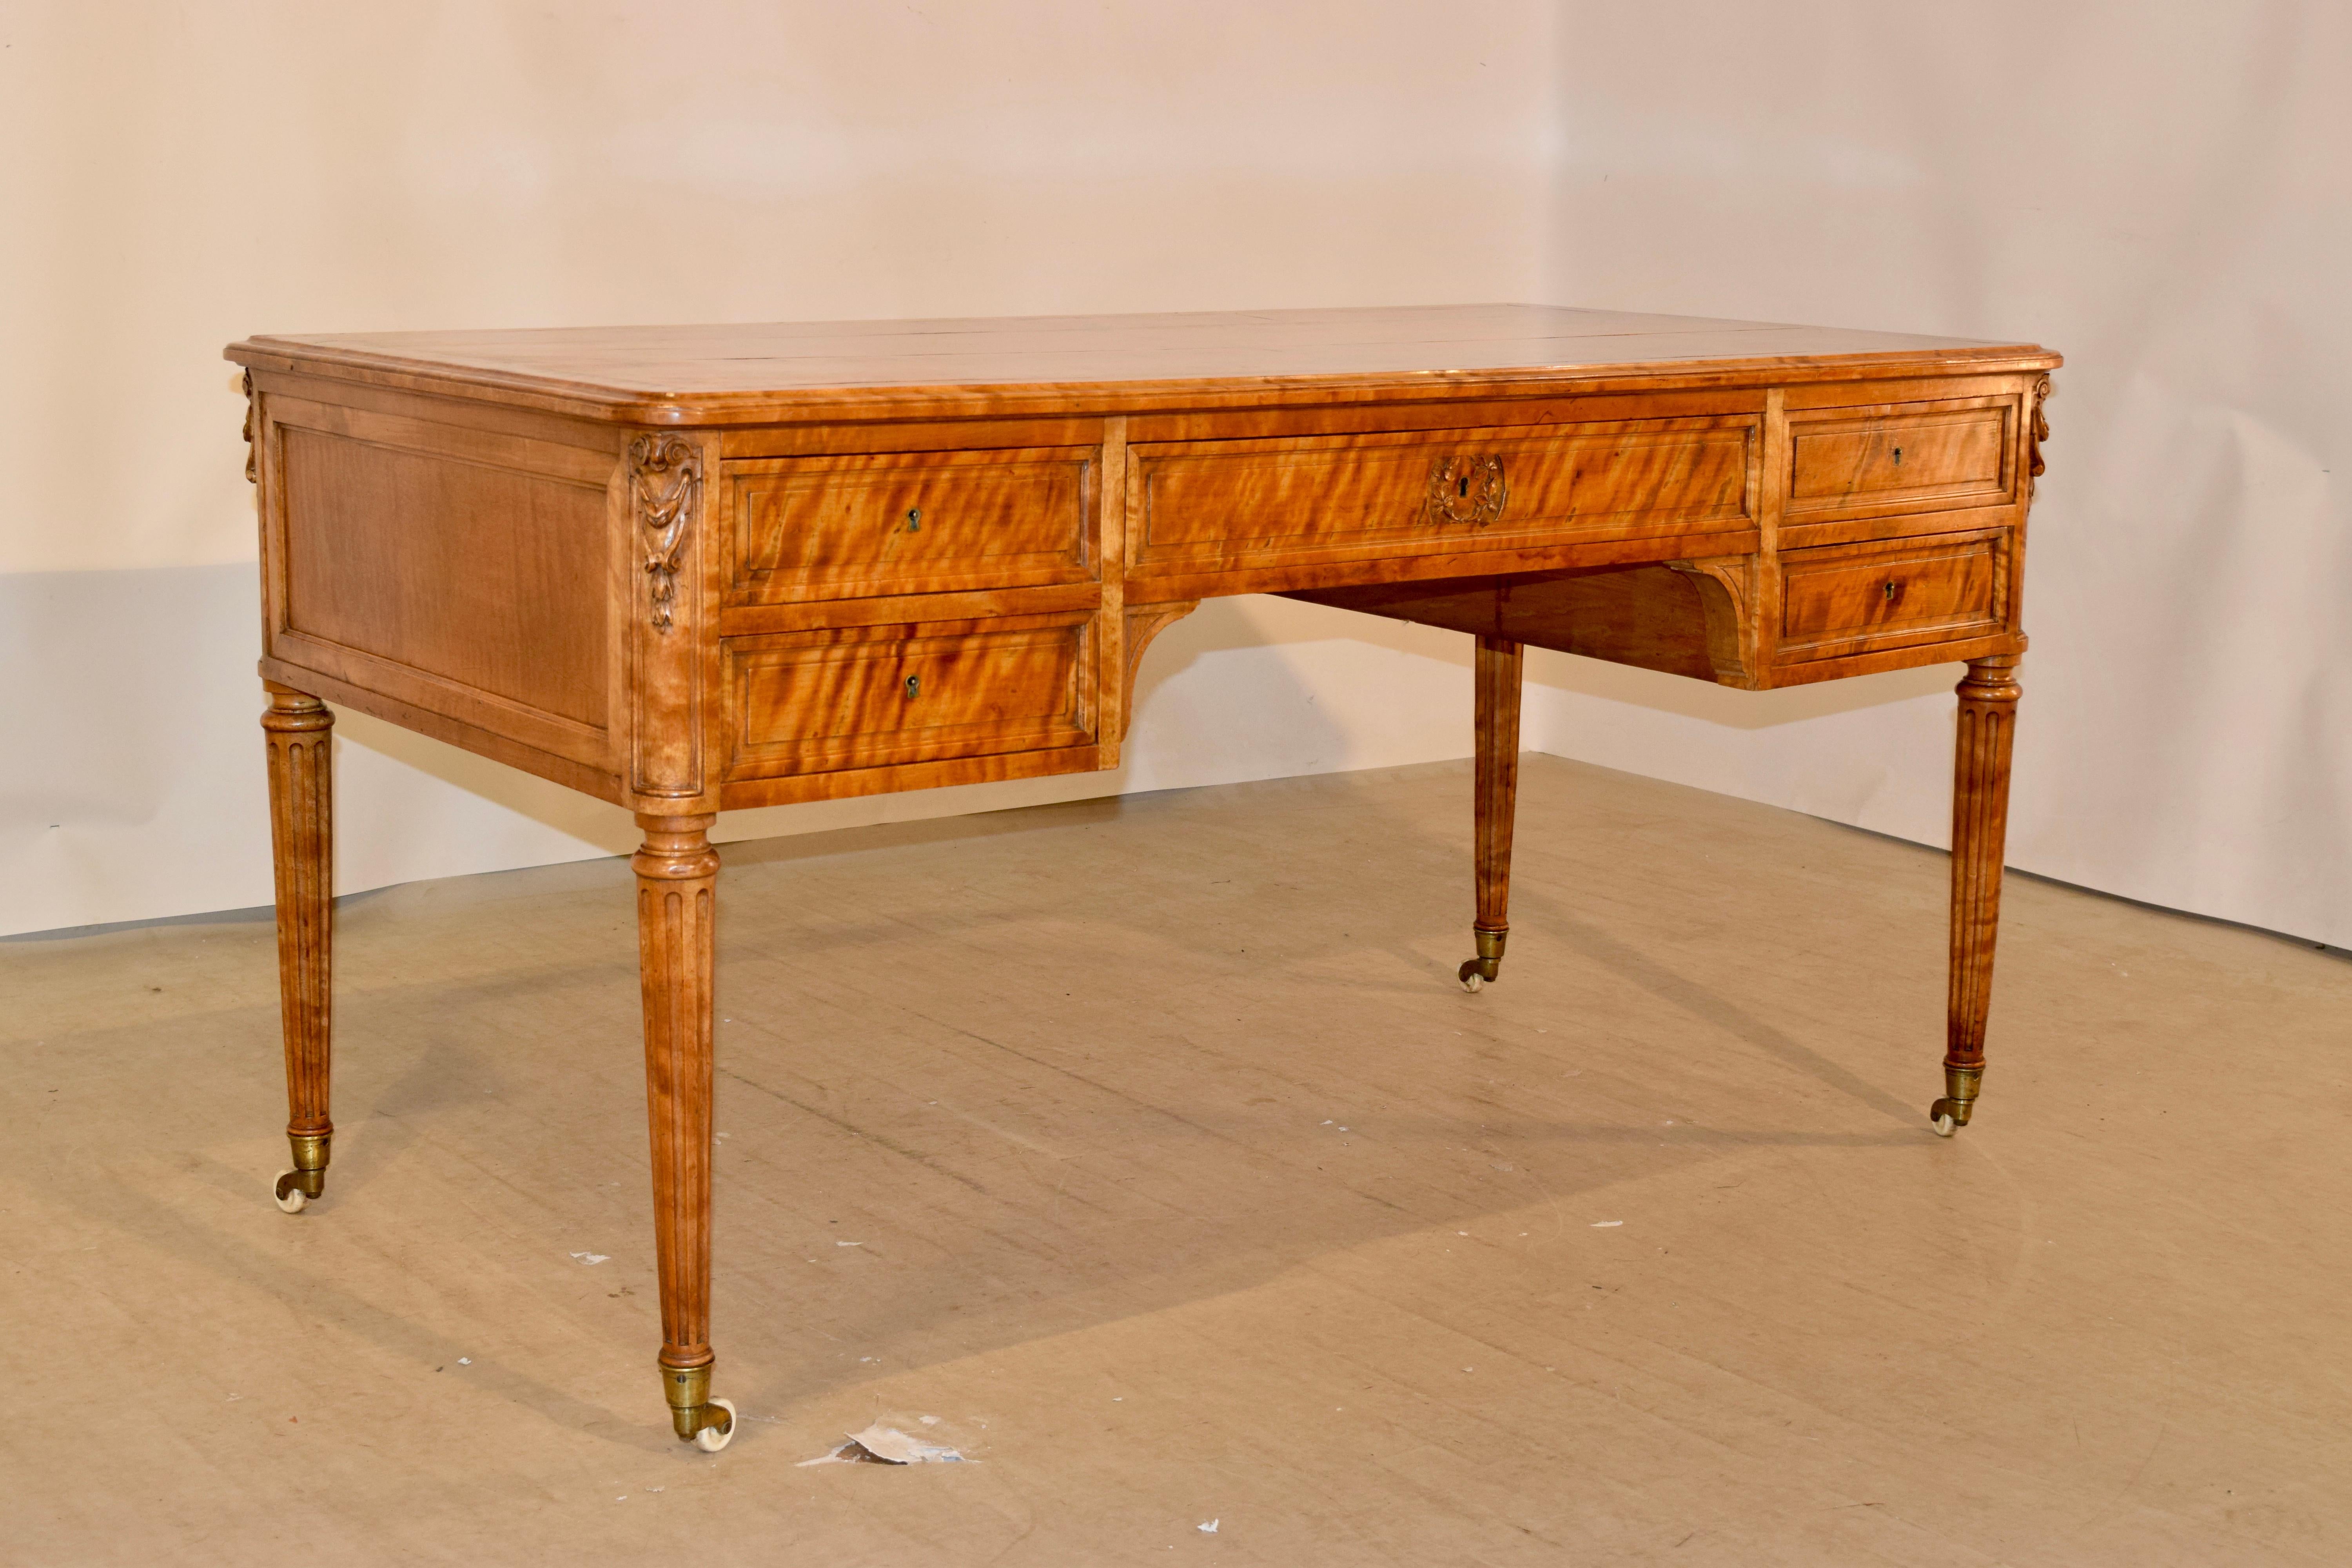 19th Century rare desk from England made from exquisite flame satin birch. The entire desk appears to be alive with the graining of this fantastic wood. The top is made of three boards and banded ends which are beveled as well. The desk itself has